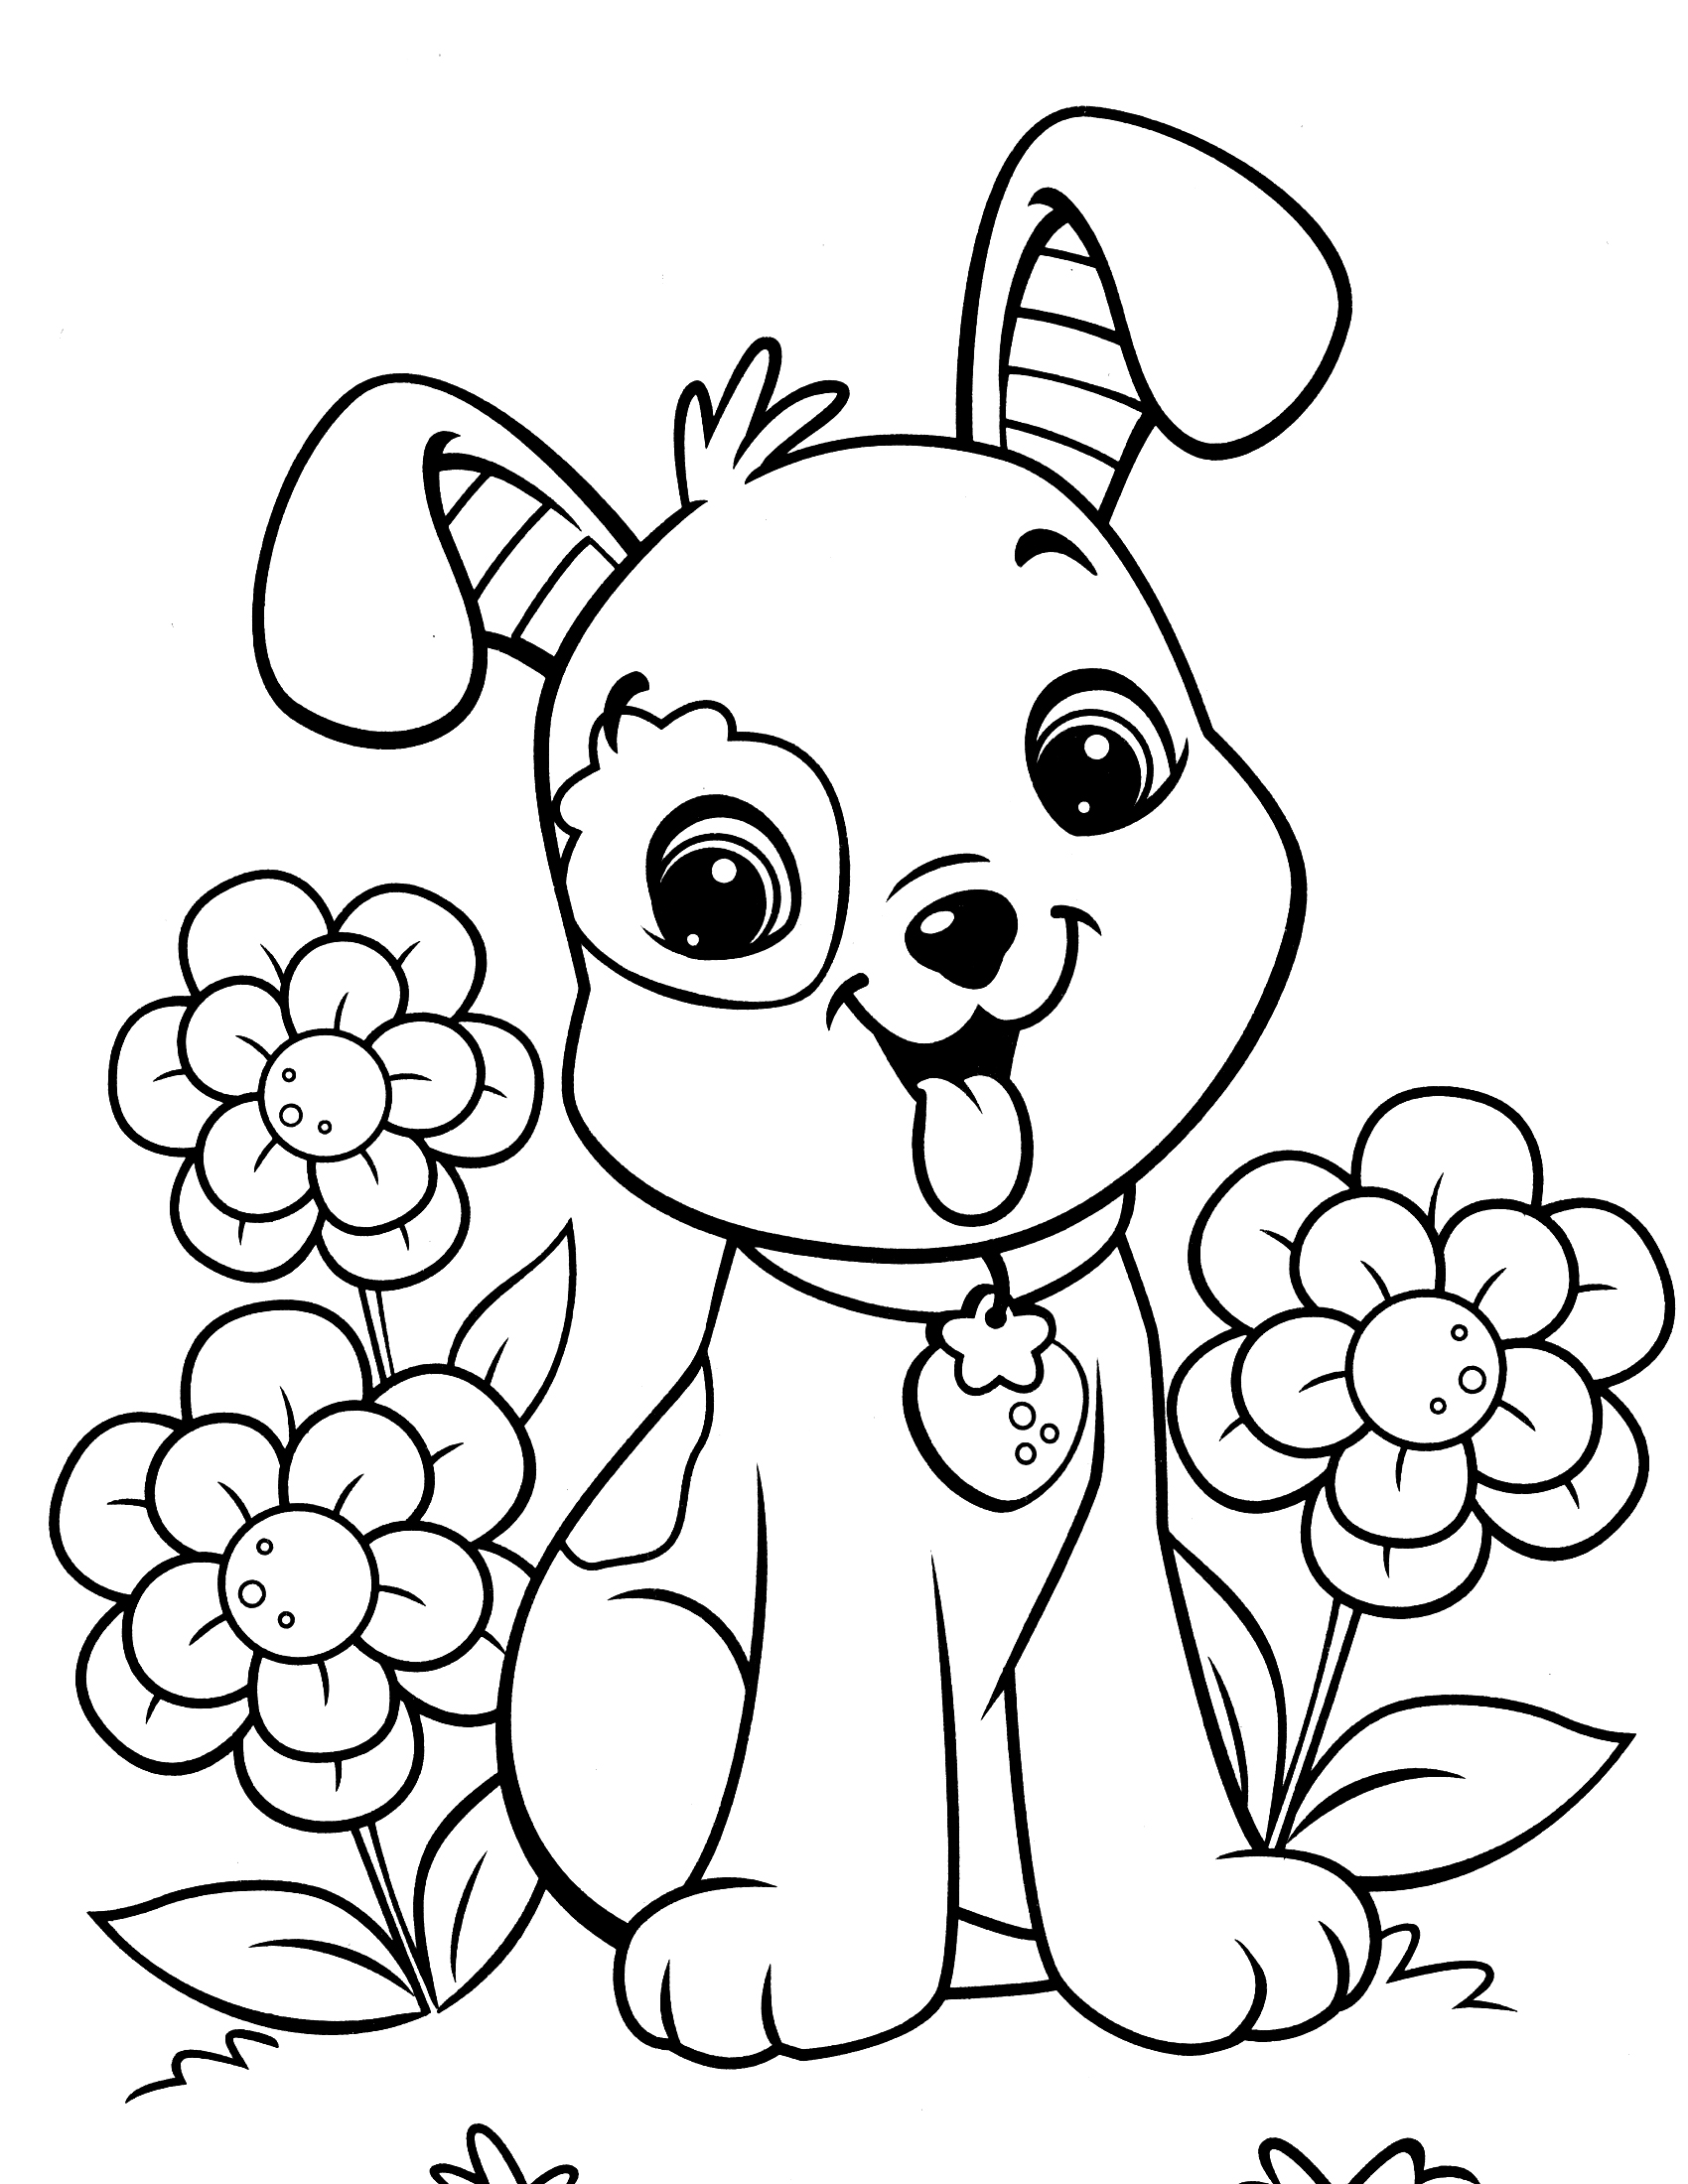 puppy-coloring-pages-best-coloring-pages-for-kids